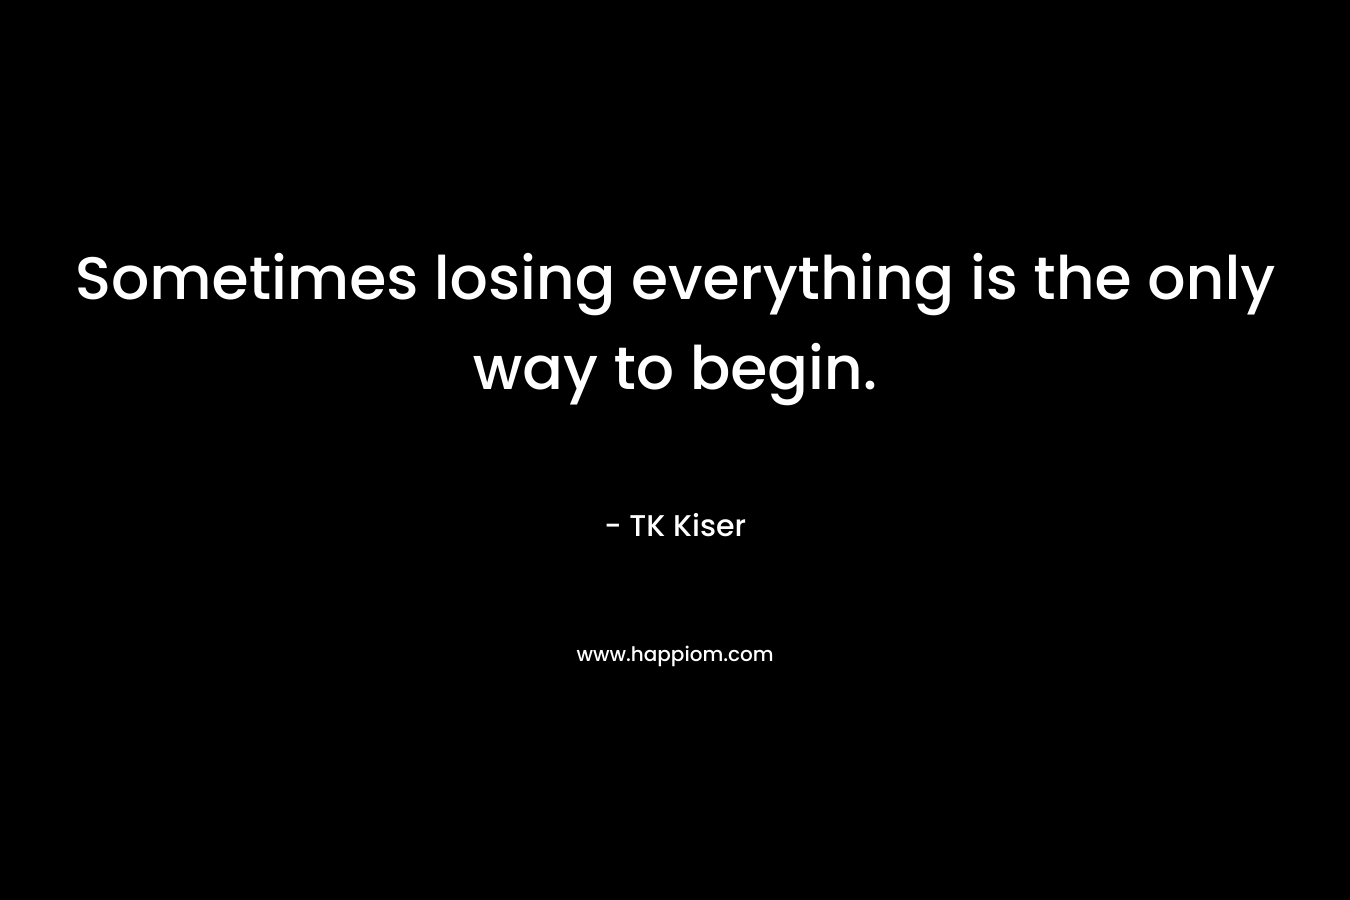 Sometimes losing everything is the only way to begin.